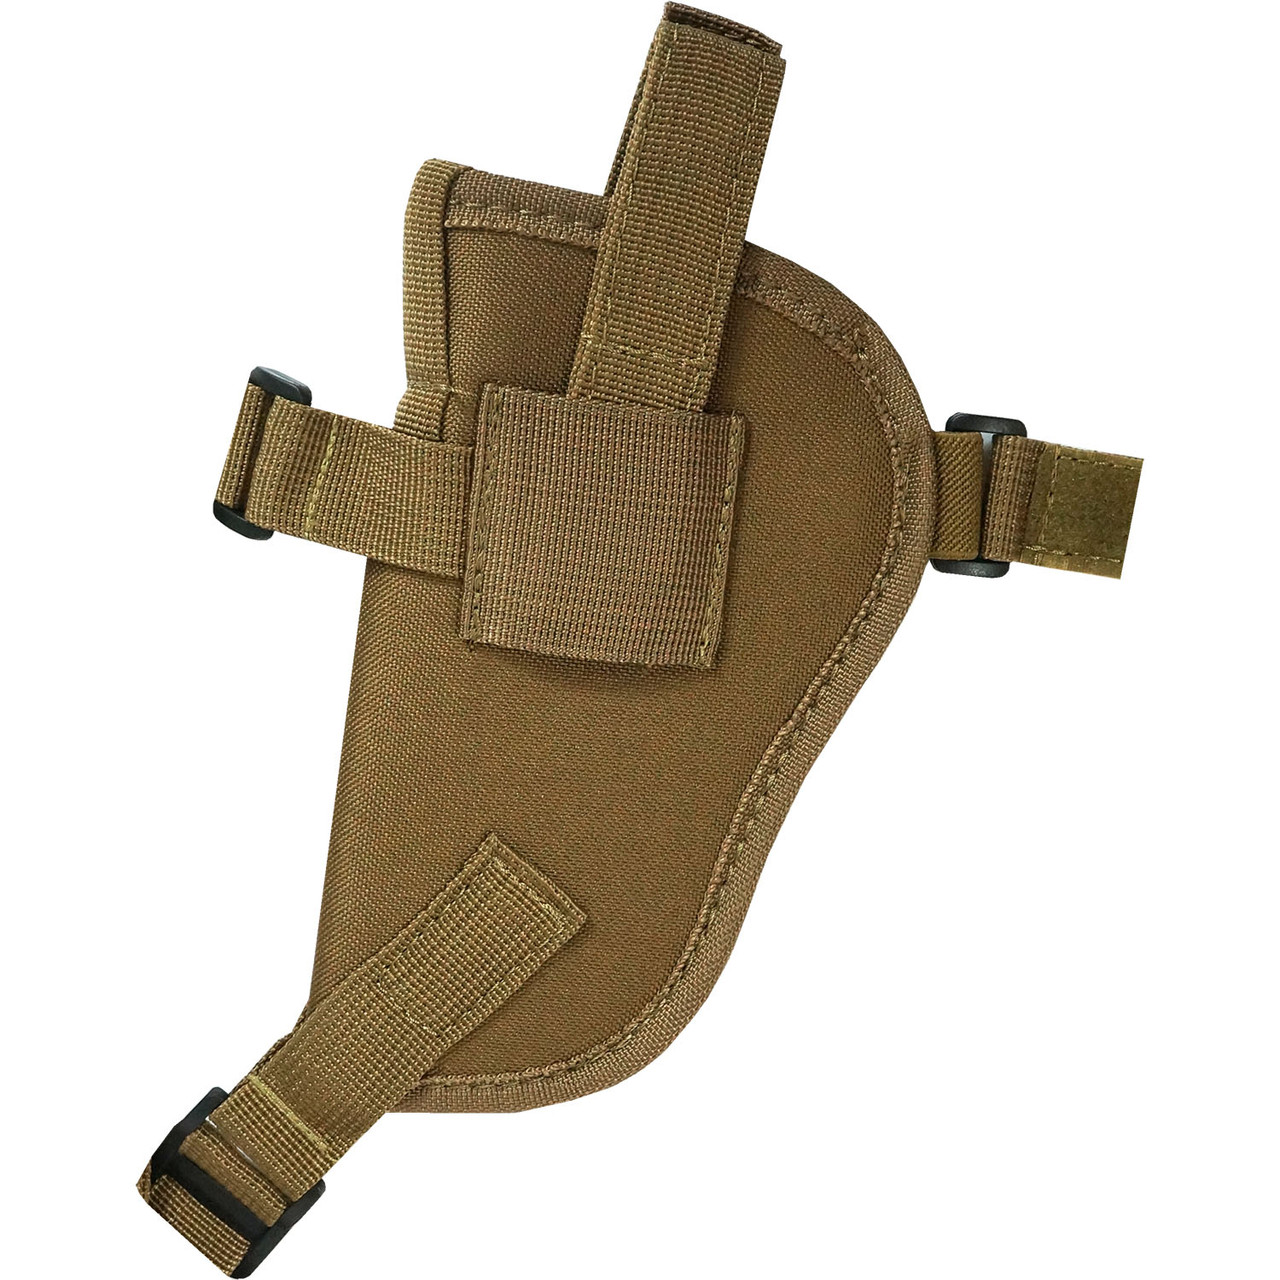 Explorer Coyote Tan Camo Fully Adjustable Every Day Carry Tactical Under Arm Double Pistol Carrier